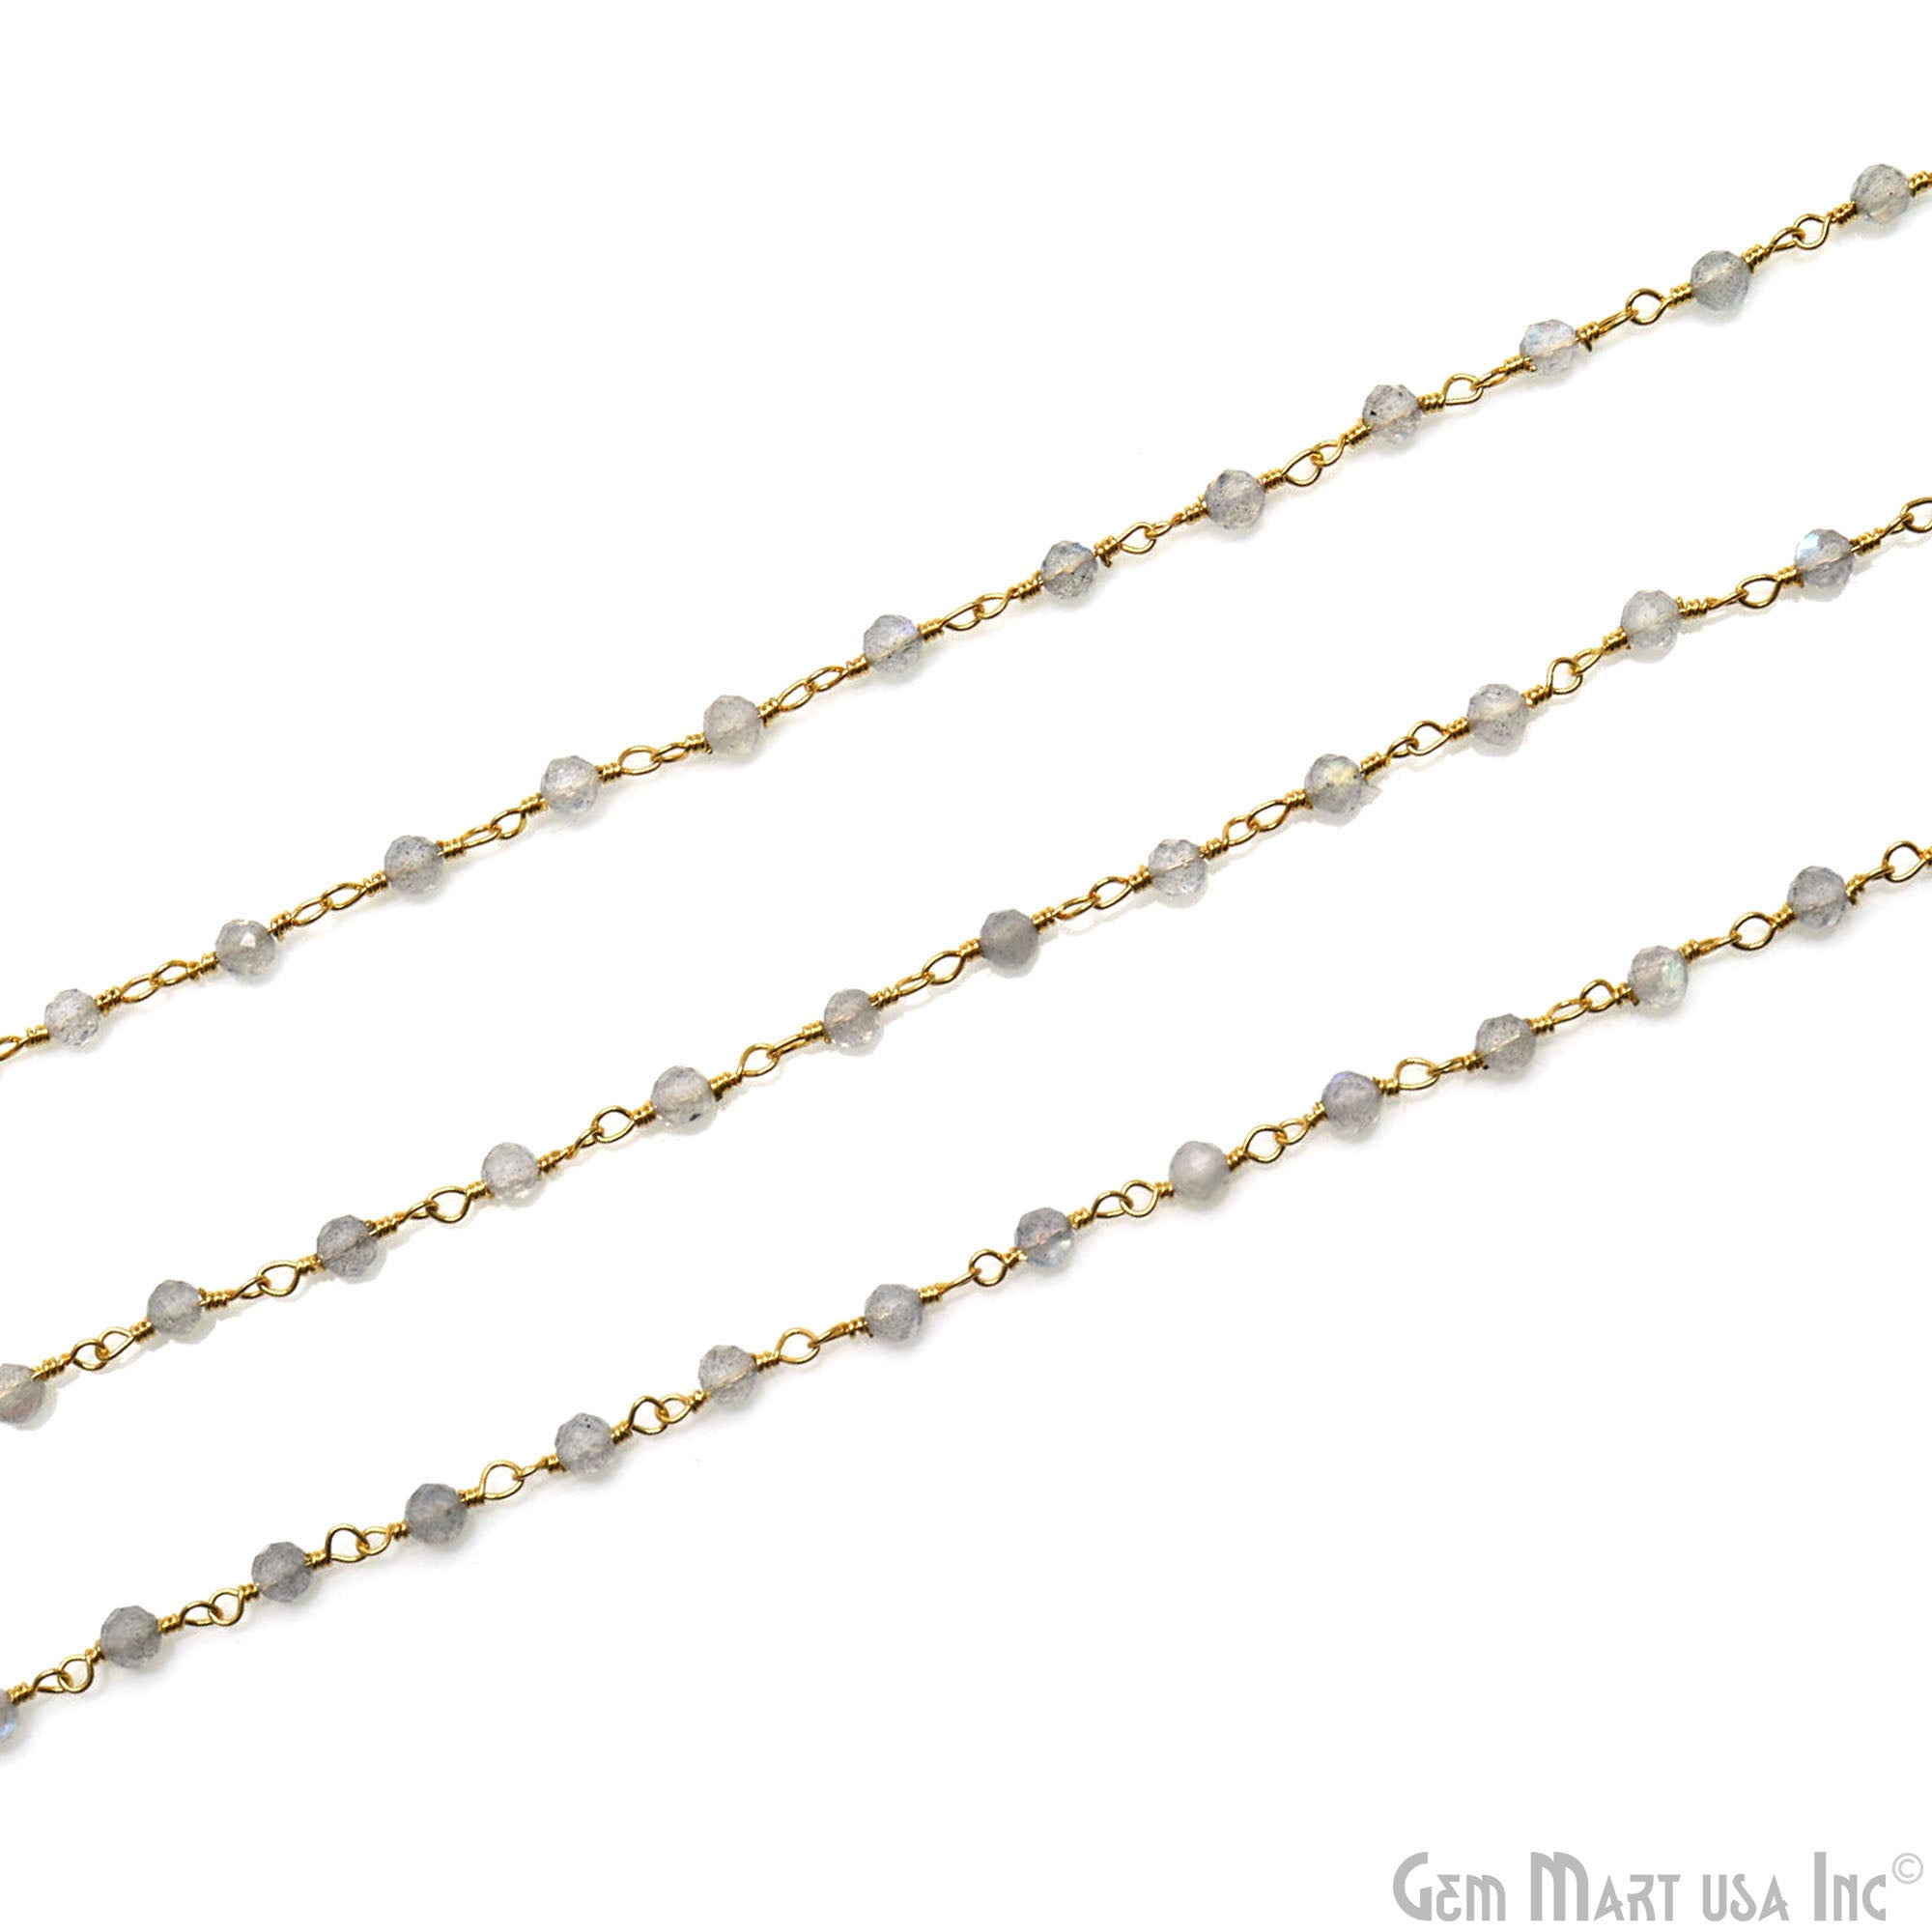 Labradorite 3-3.5mm Gold Plated Wire Wrapped Beads Rosary Chain (763745435695)